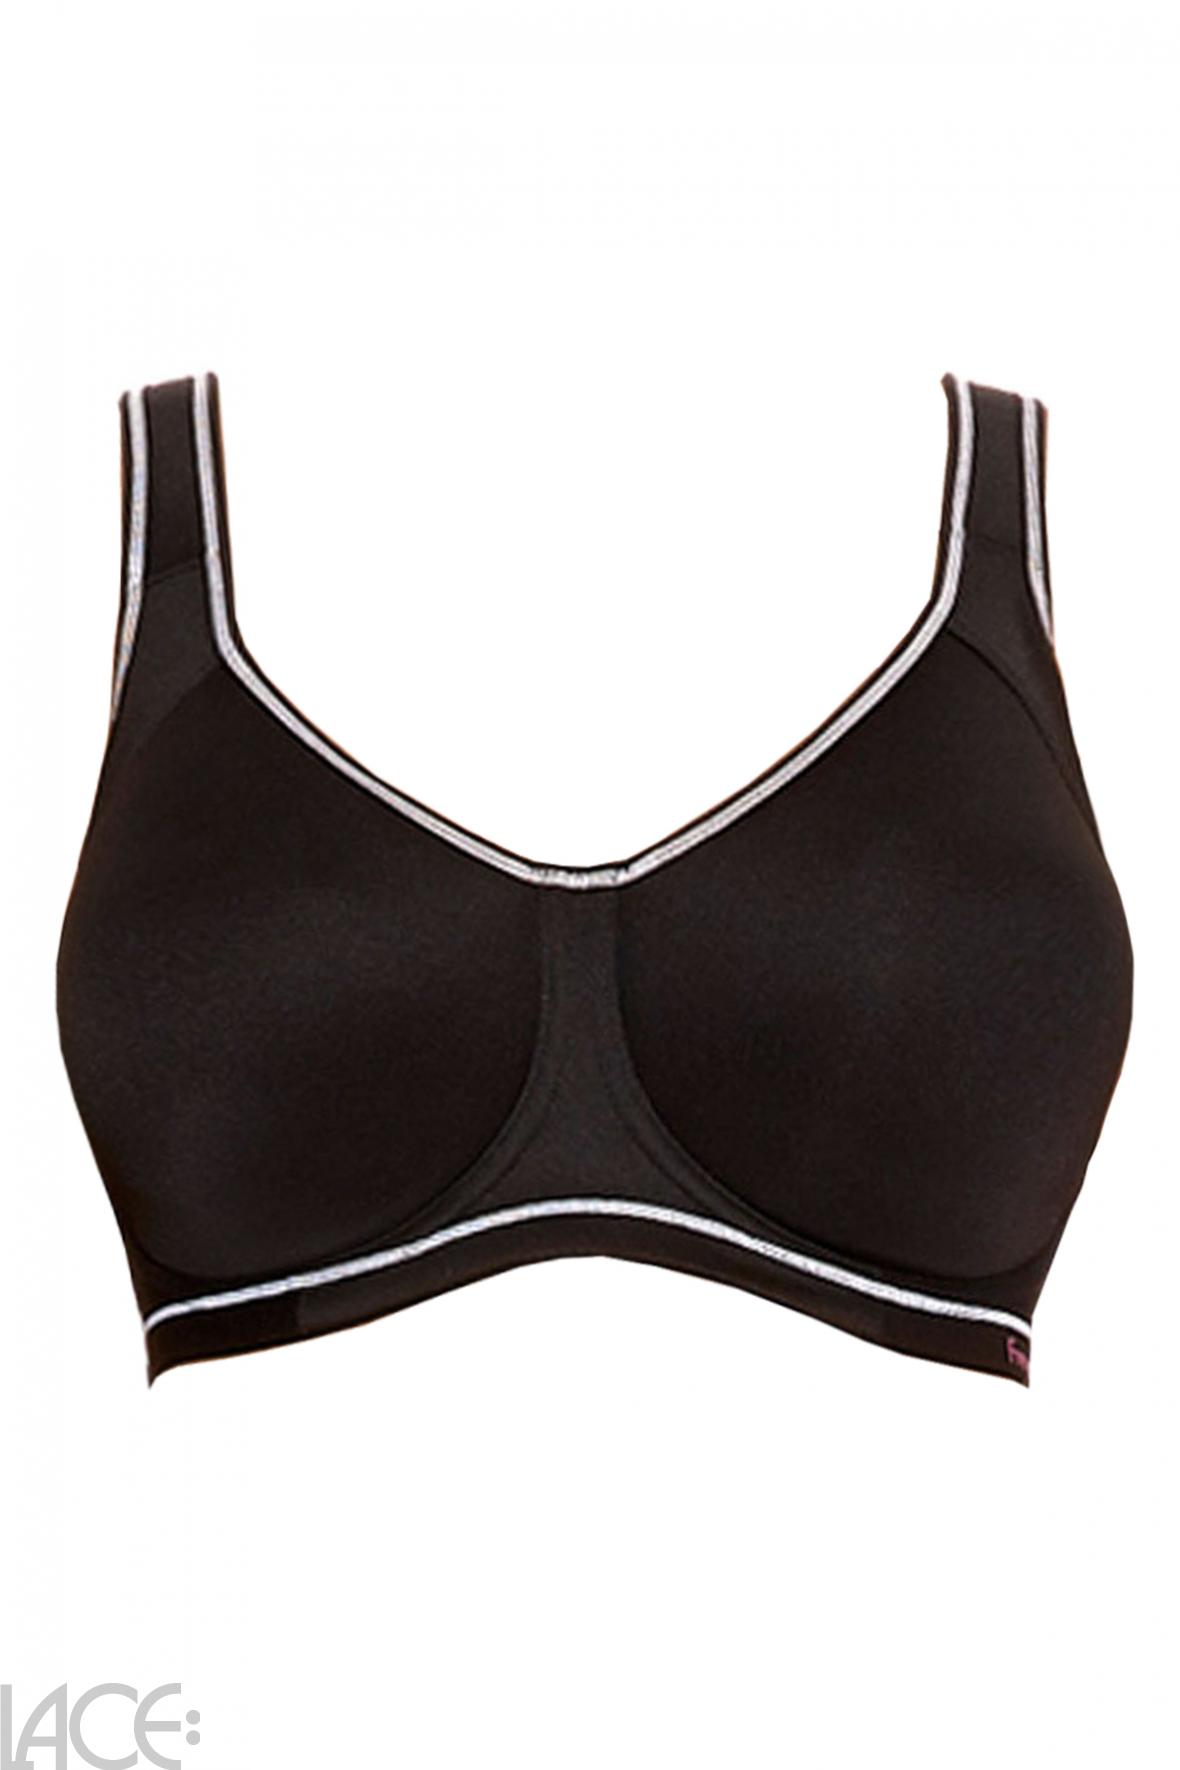 Freya Lingerie Sonic Sport-Underwired Sports bra E-H cup STORM